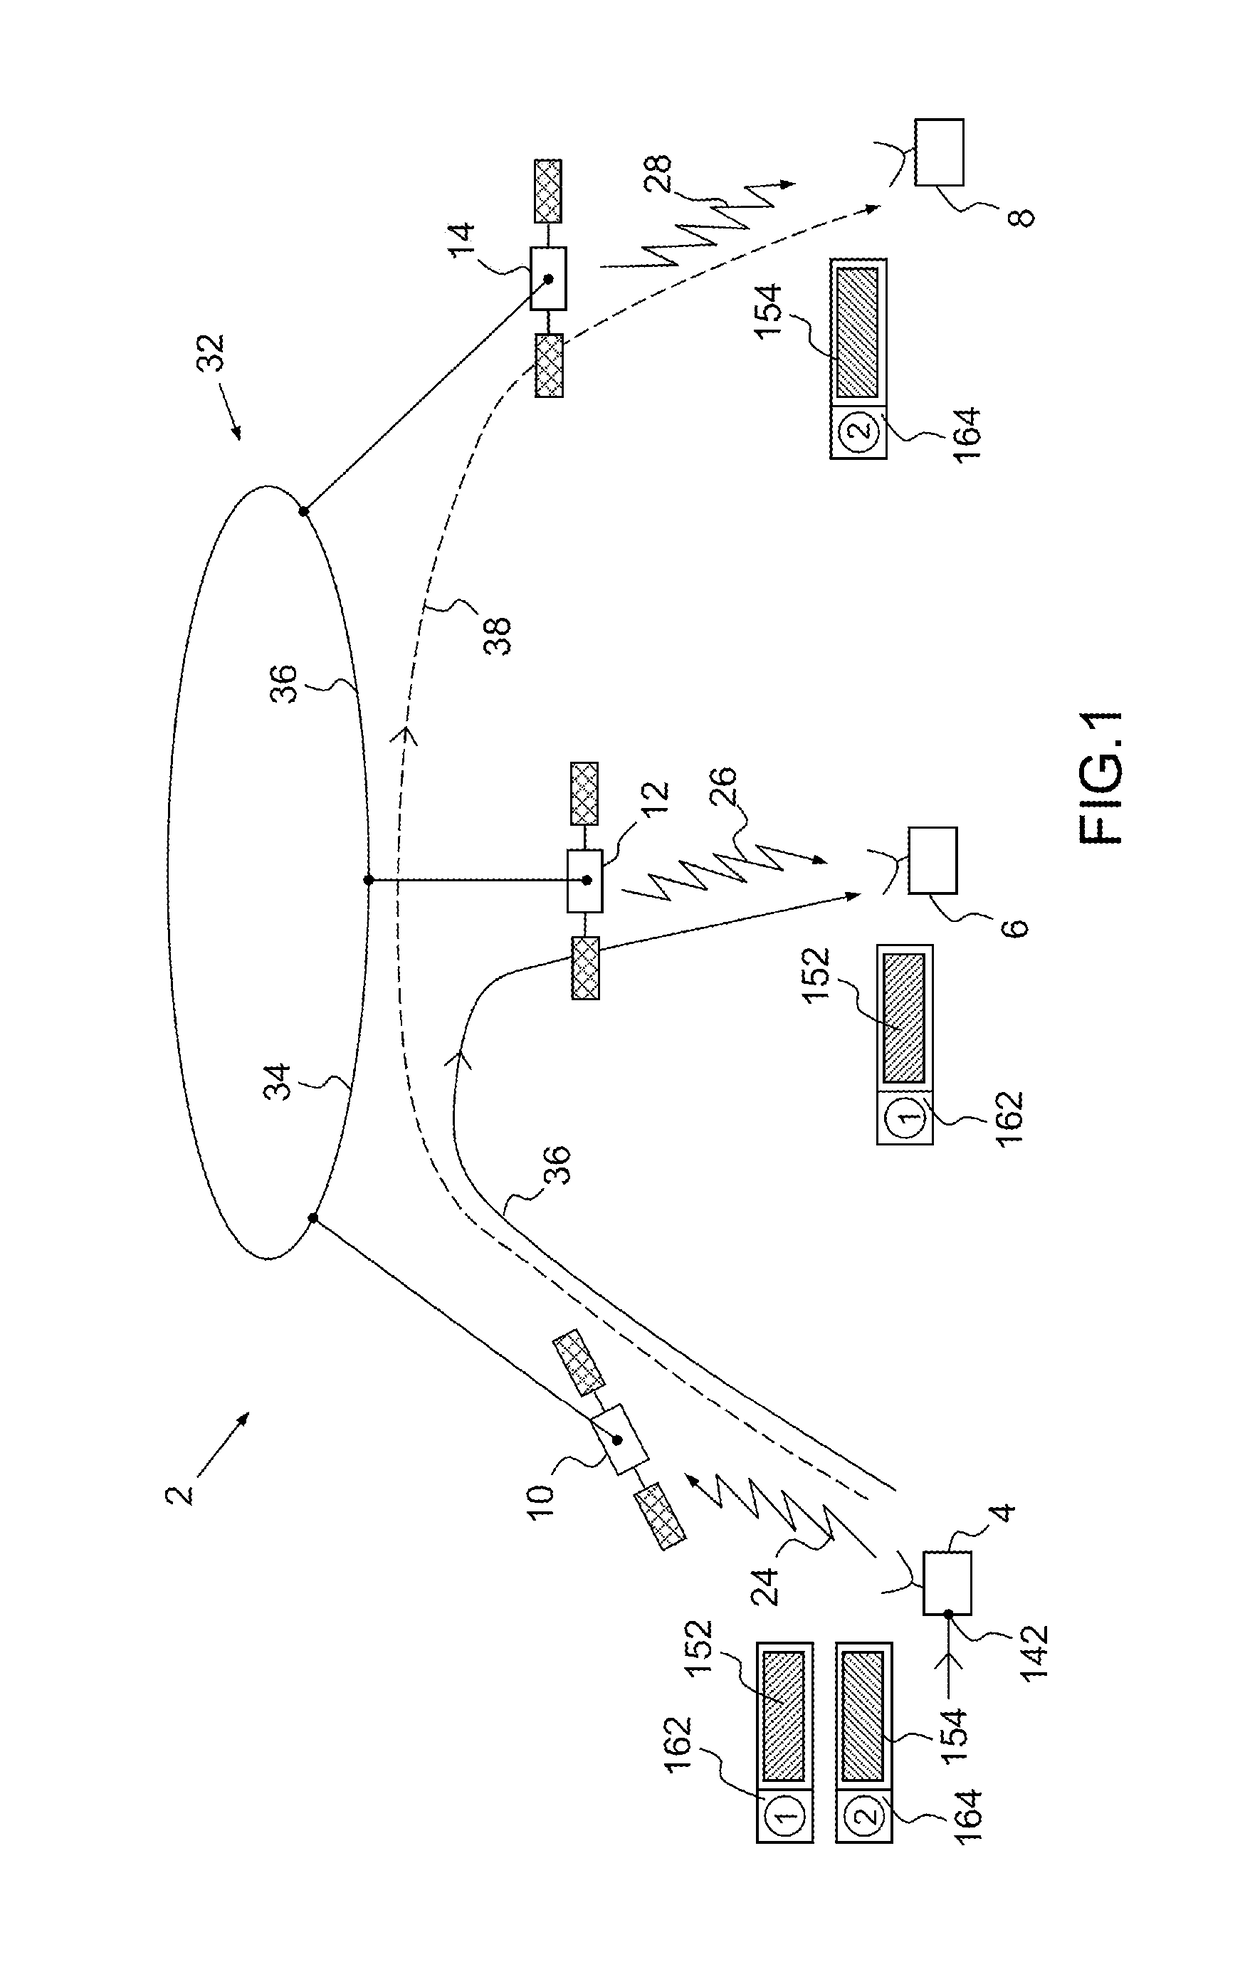 Method for transparent on-board routing of data packets at very high bit rate in a space telecommunication system using a network of at least one regenerative satellite(s)